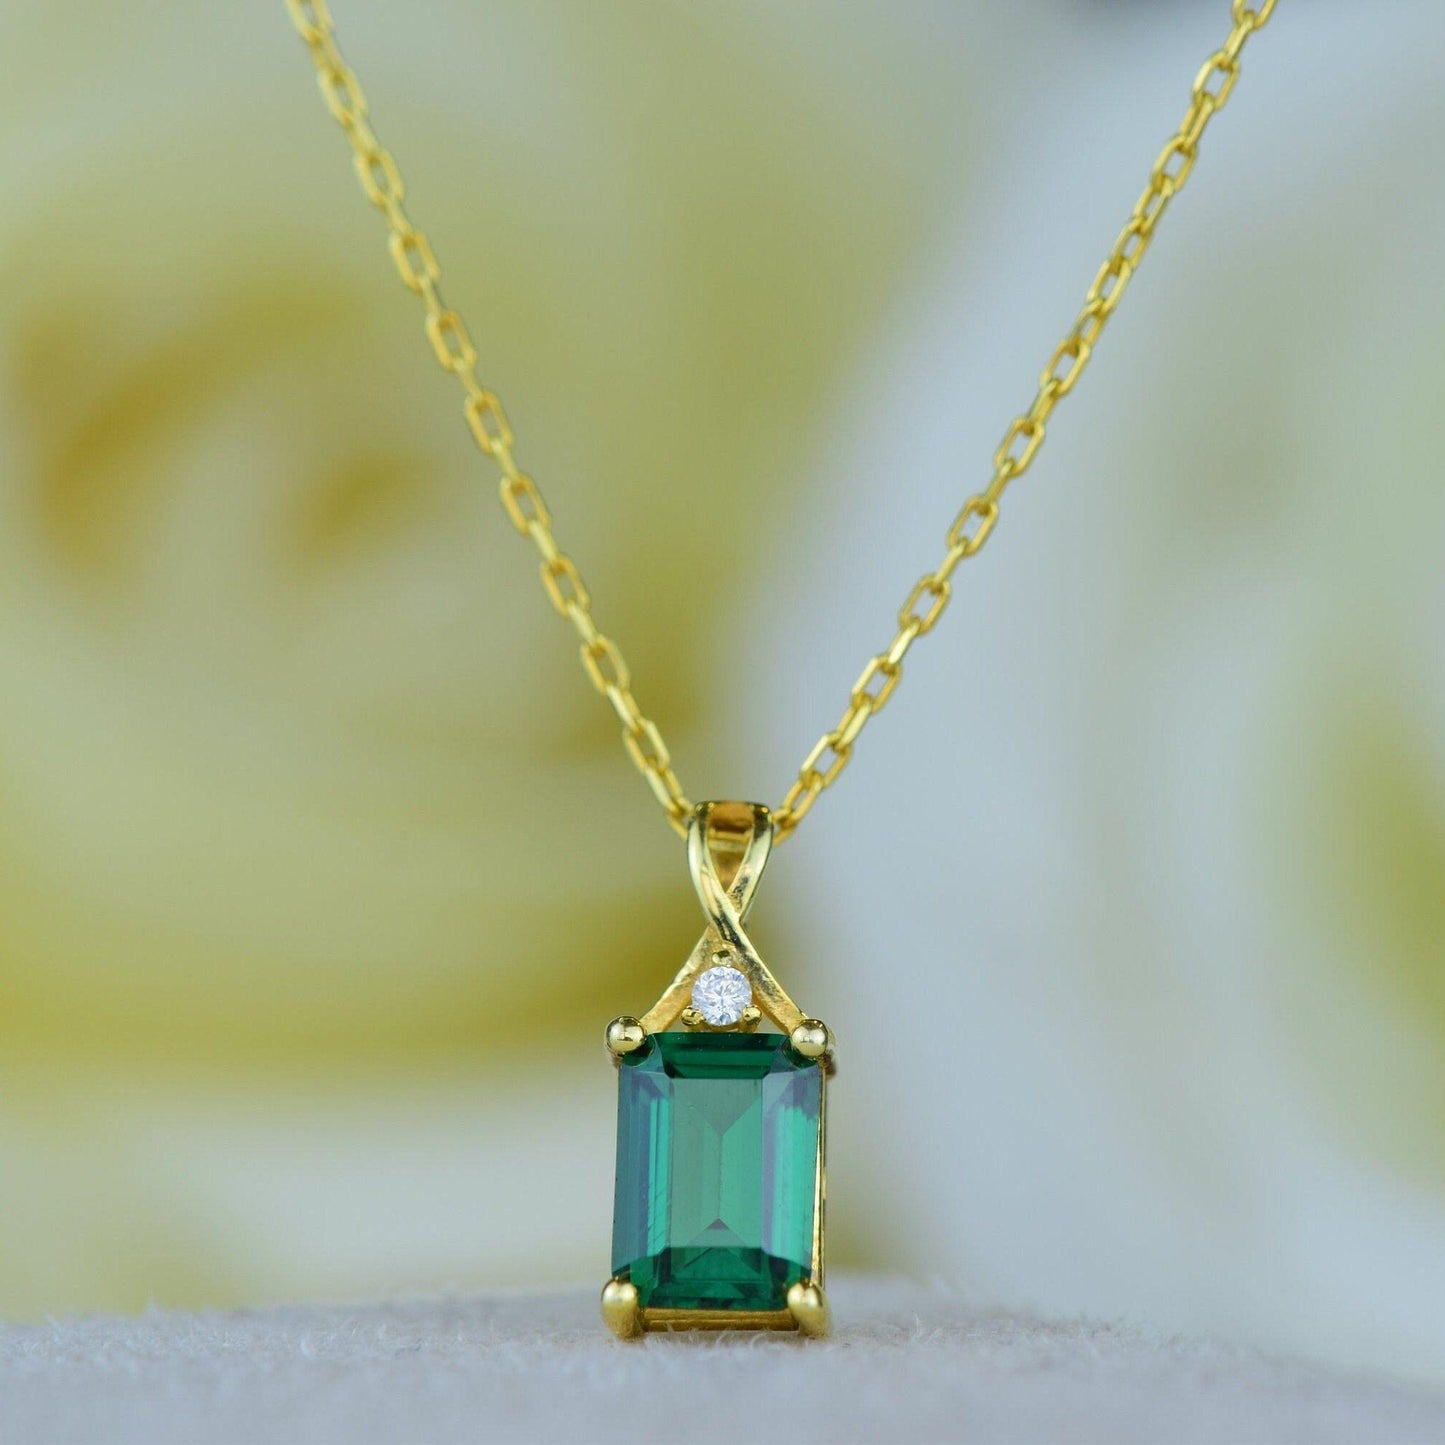 14K Gold Emerald Cut Solid Necklace Pendant Dainty Emerald Necklace Gift For Her - JBR Jeweler